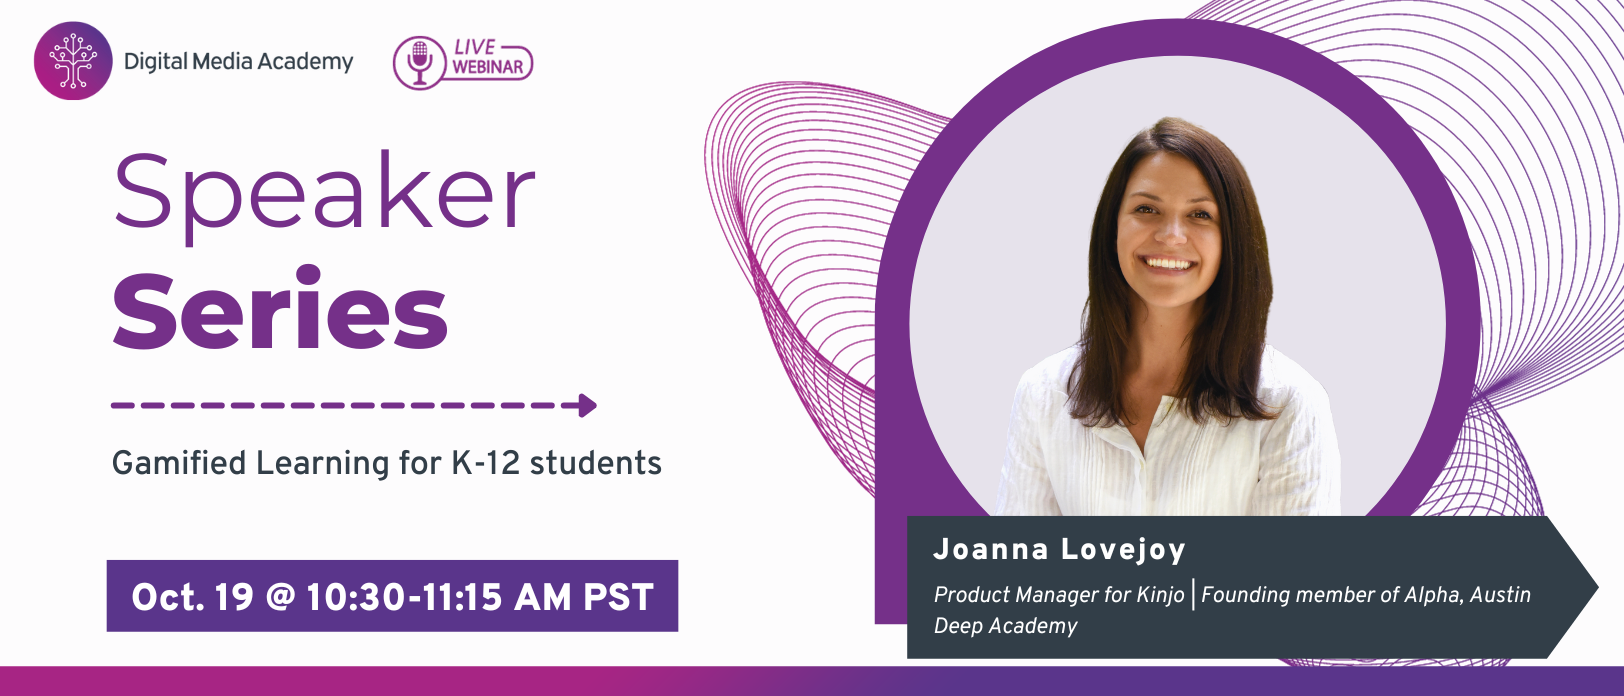 Speaker Series #007 - Gamified Learning for K-12 Sudents with Joanna Lovejoy